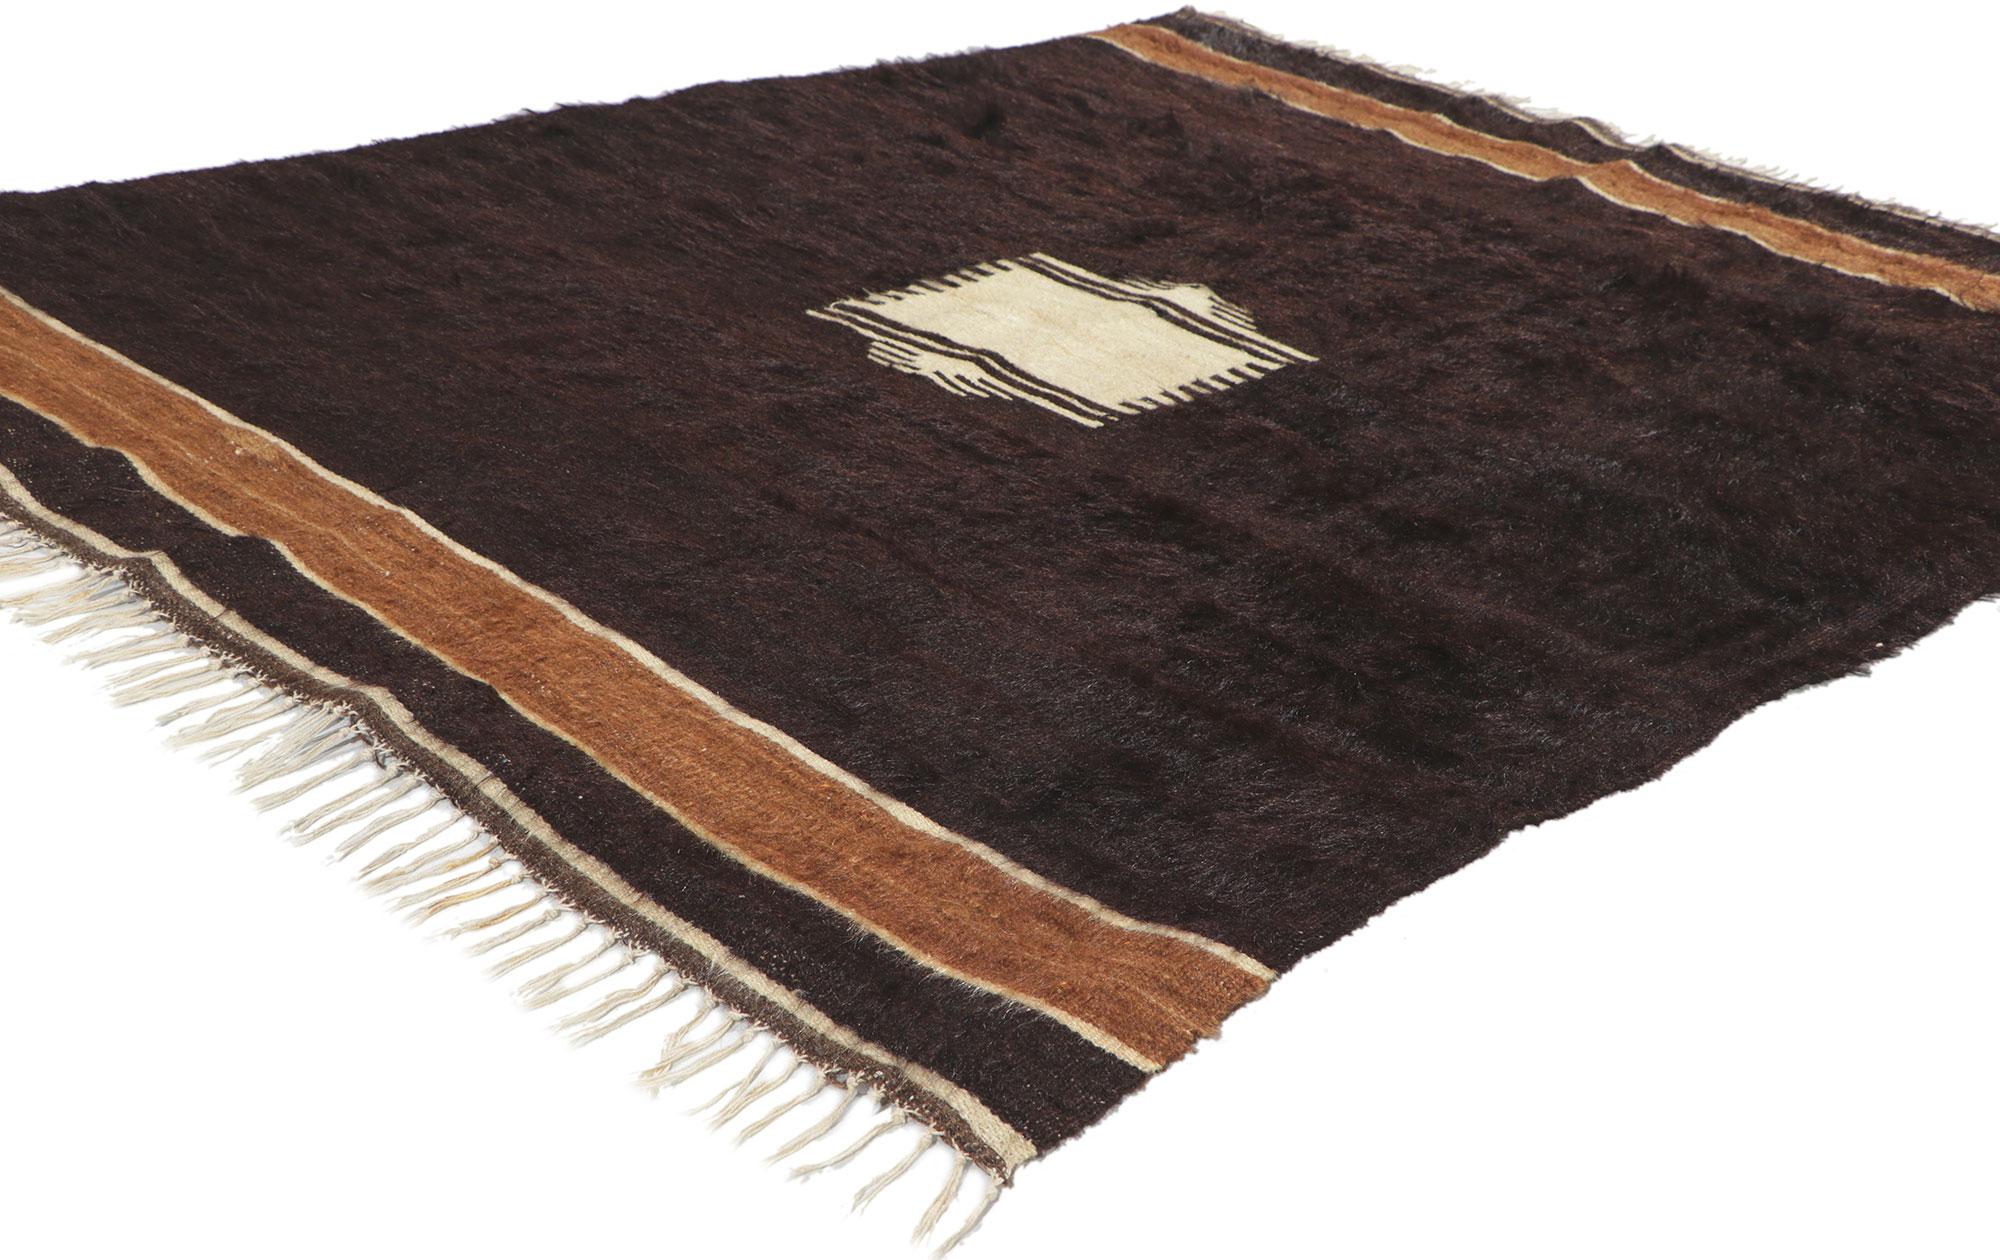 53855 Vintage Turkish Angora Wool Blanket Kilim rug, 04'02 x 05'03. With its shaggy pile, incredible detail and texture, this handwoven Turkish angora kilim rug is a captivating vision of woven beauty. The eye-catching geometric design and earthy